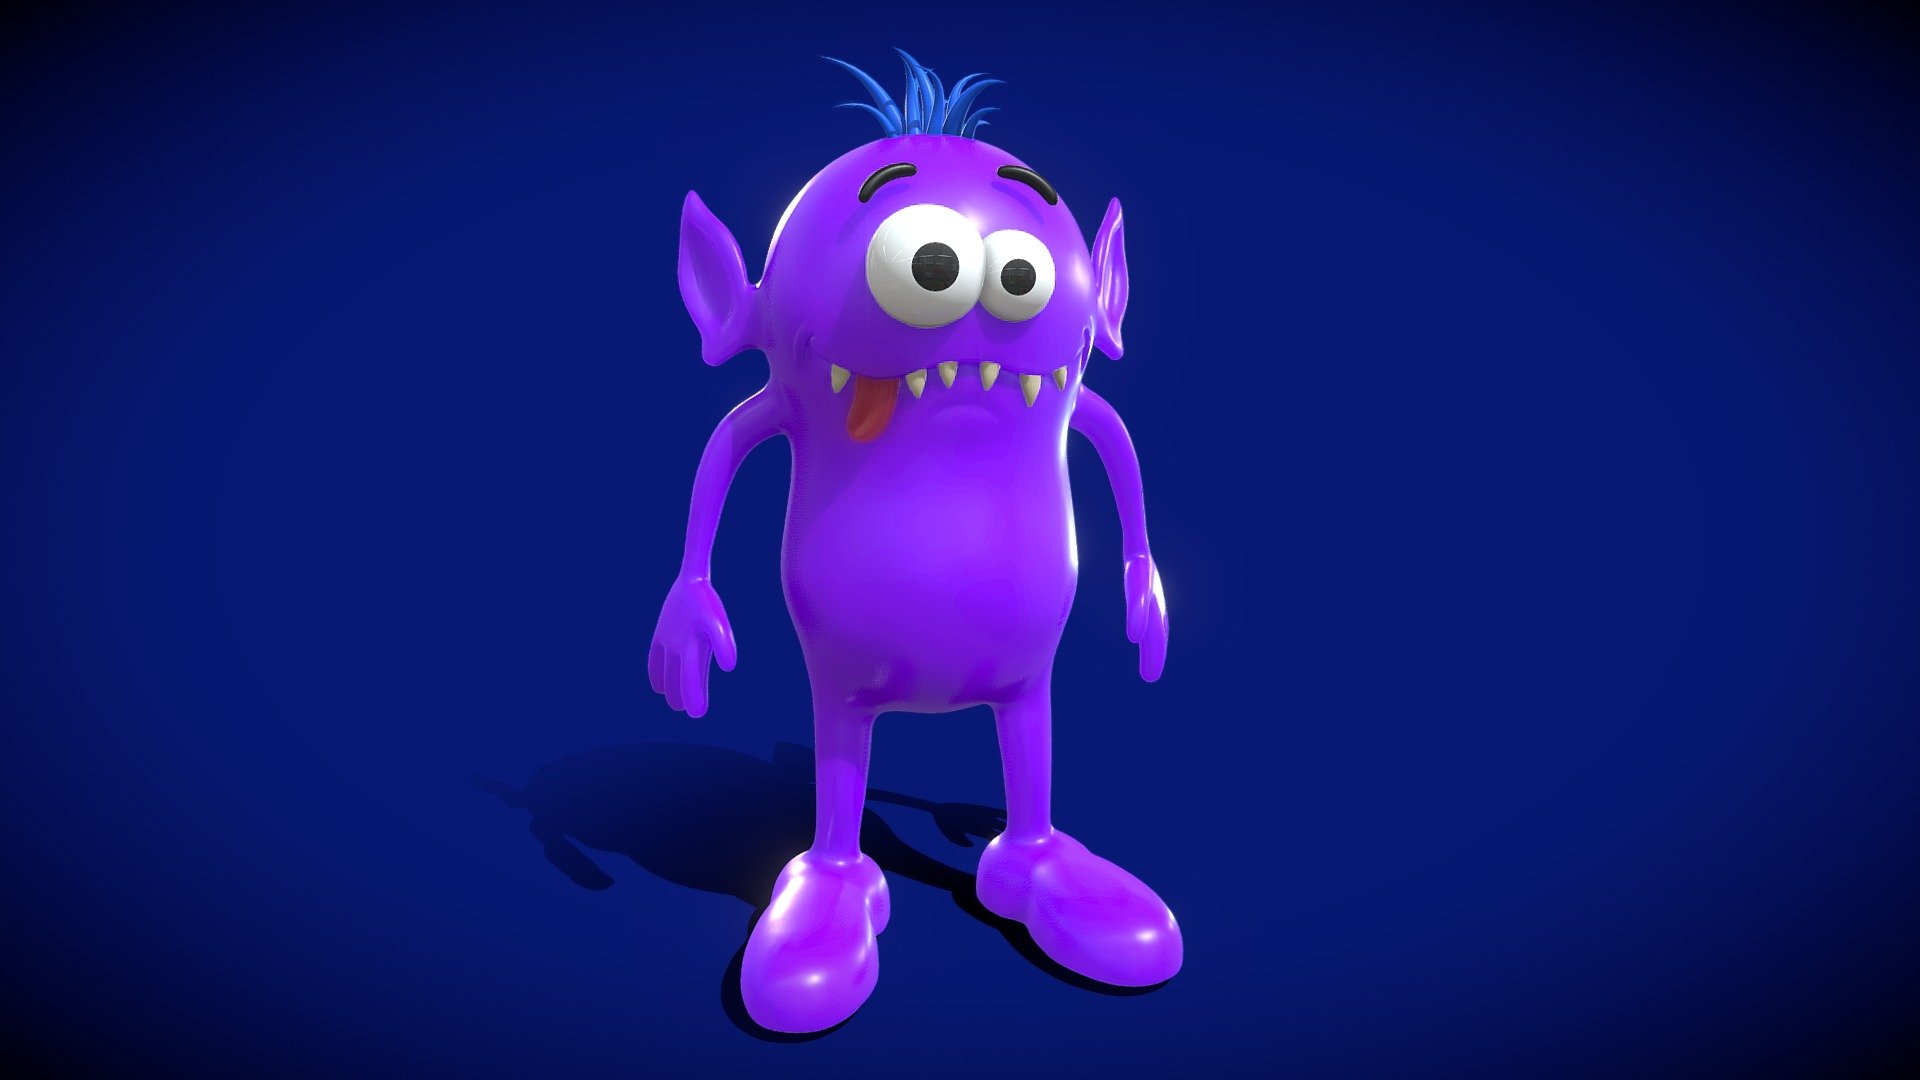 Cute monster character sculpt created with Blender.

Watch the tutorial on how to make the character here:  https://youtu.be/QpmoMX0Fs_U

Contents when purchased:




Cute Monster Character Blender file

Final Render

HDRI Lighting
 - Cute Monster Character - Buy Royalty Free 3D model by Ryan King Art (@ryankingart) 3d model